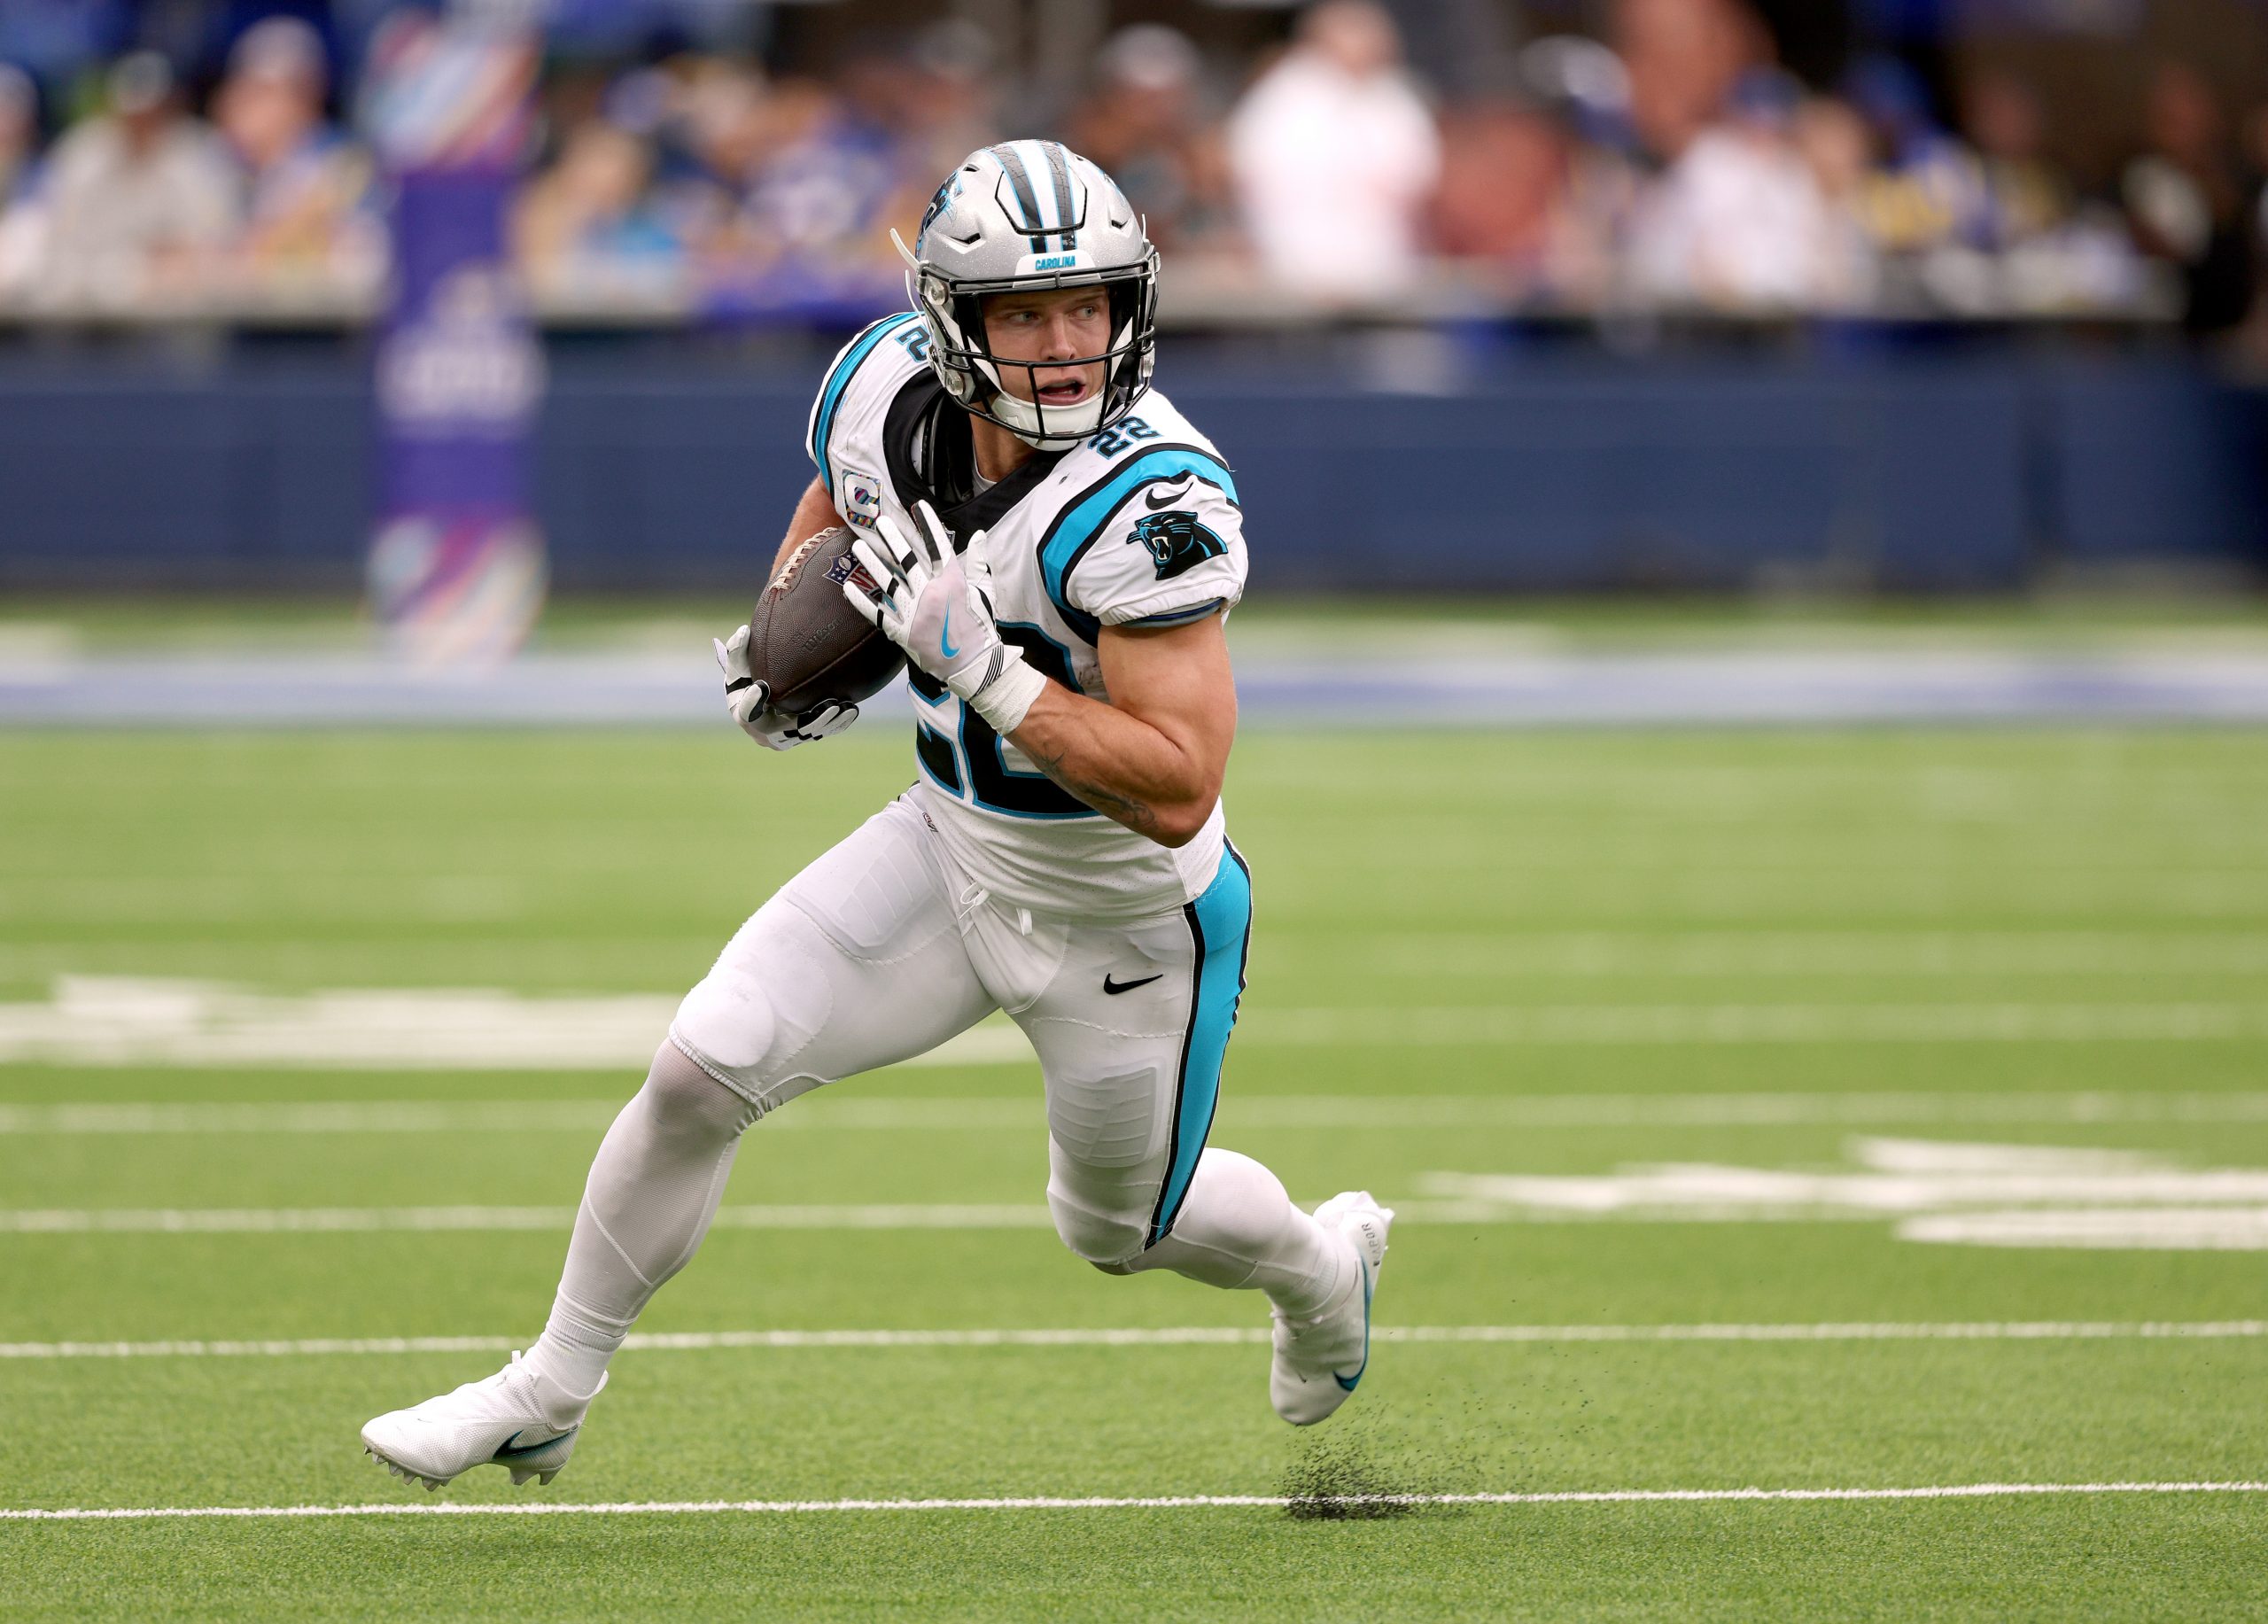 Christian McCaffrey #22 of the Carolina Panthers runs after his catch during a 24-10 loss to the Lo...